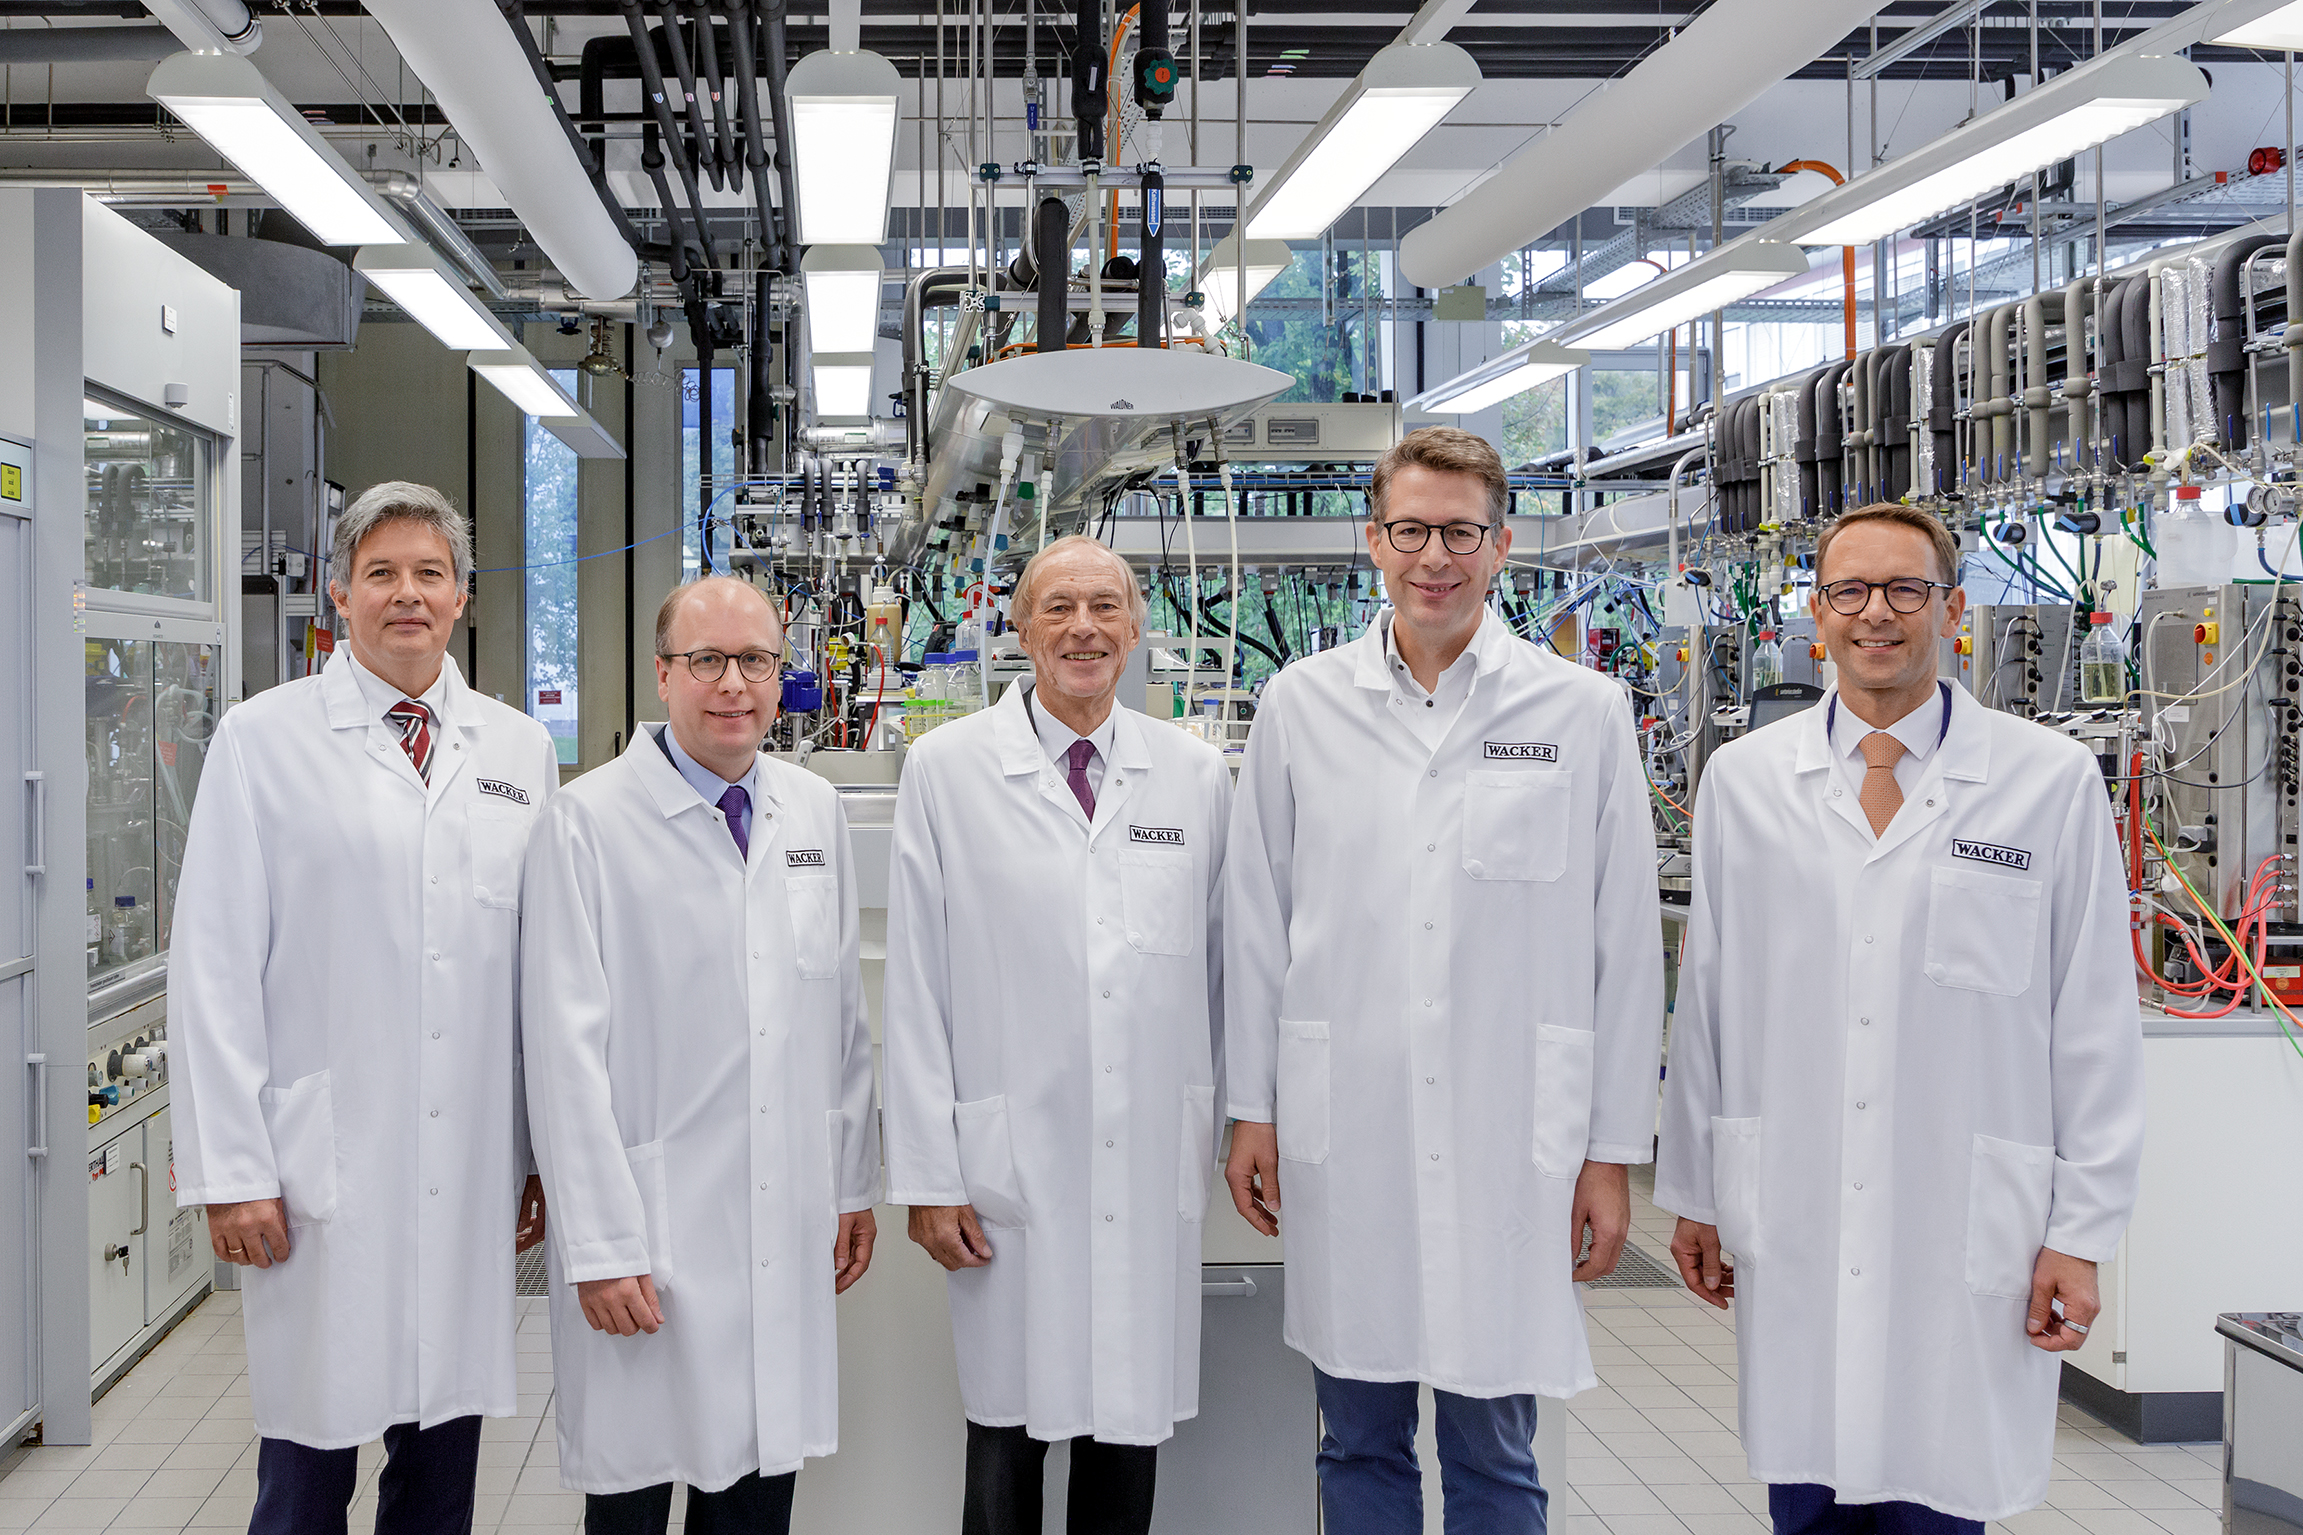 Research consortium composed of XL-protein GmbH, Wacker Chemie AG and Ludwig-Maximilians-Universität München (LMU) 